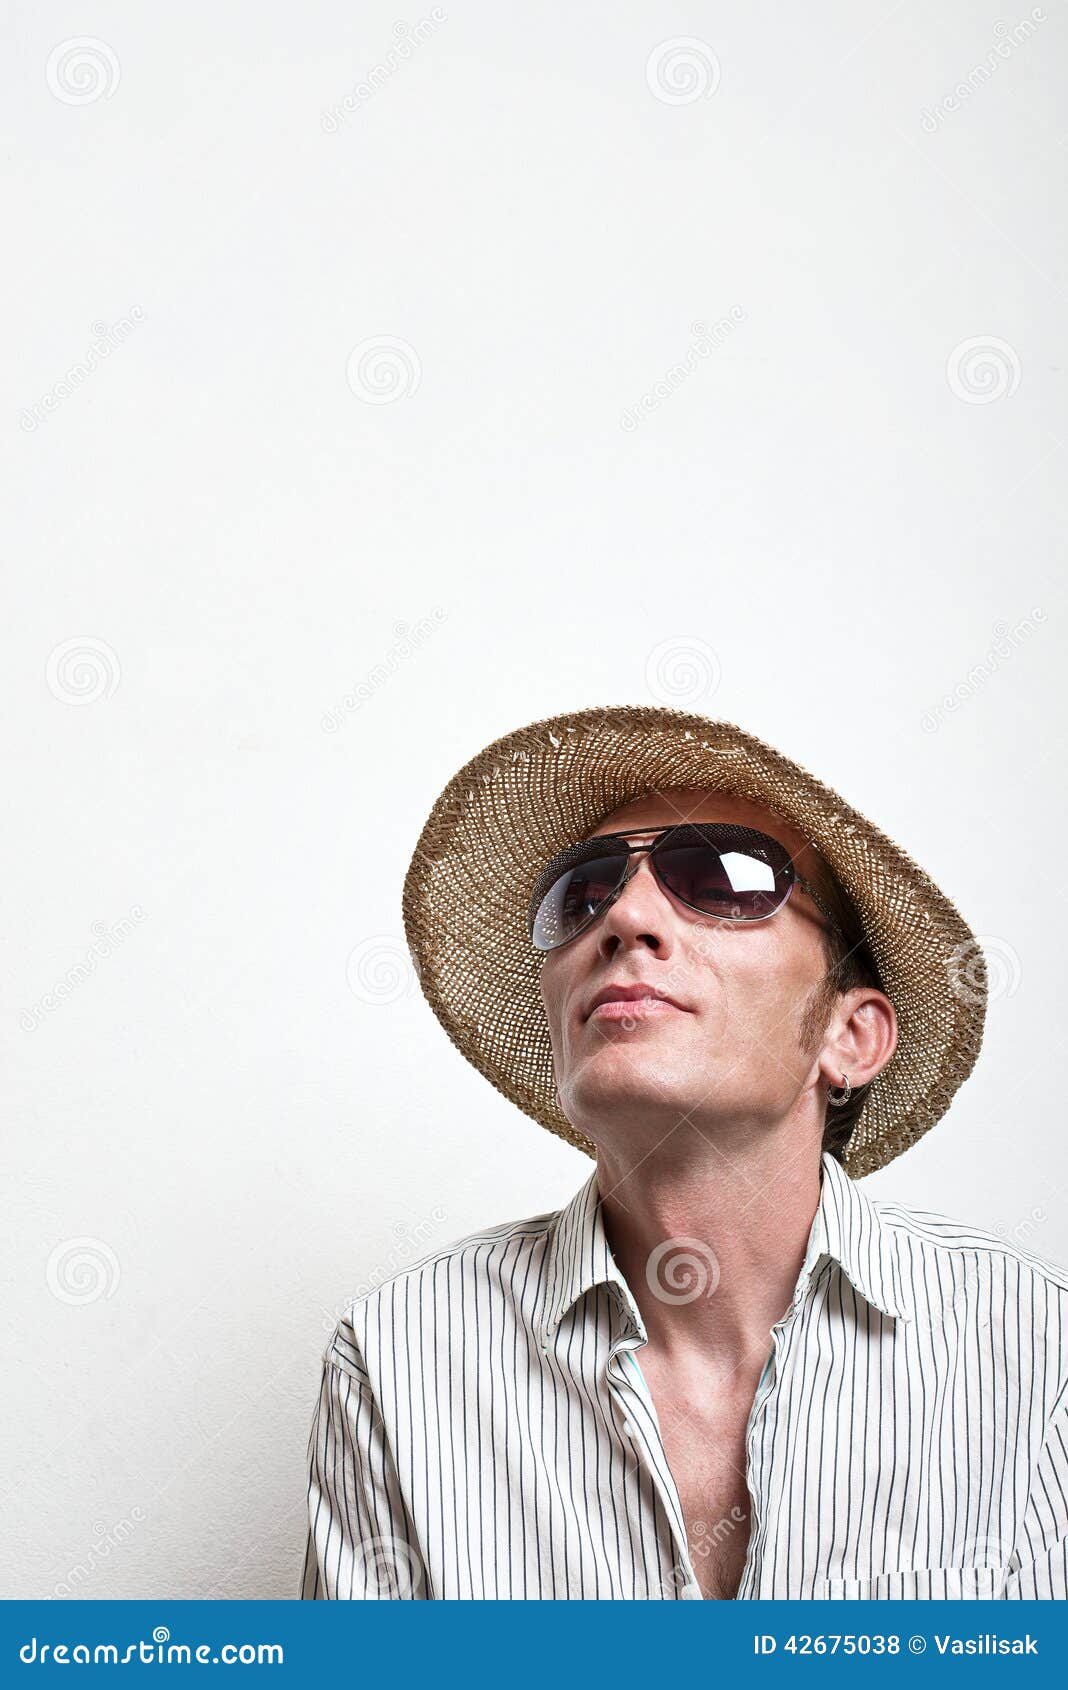 crazy vacationer in straw hat and sunglasses dreaming